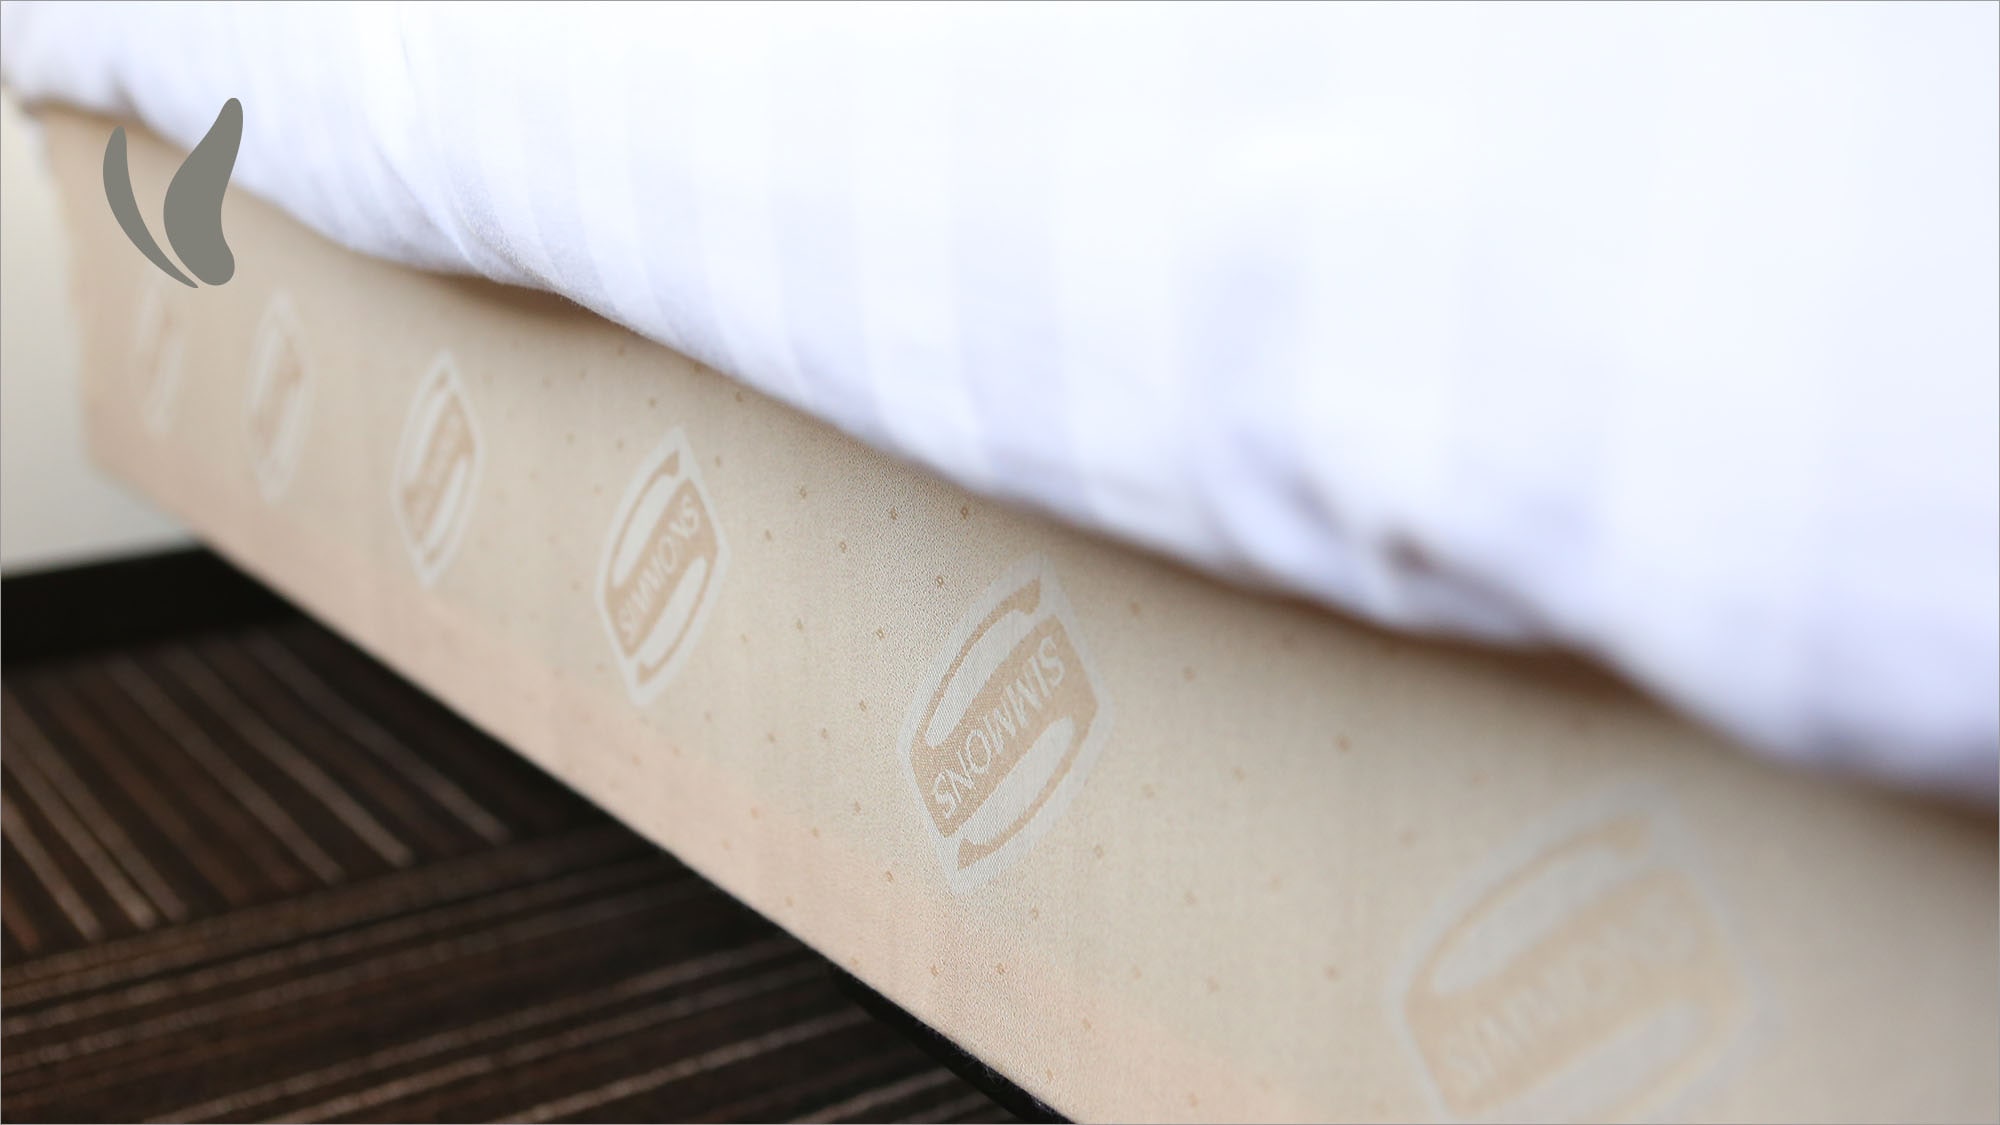 Simmons Bet: Get a good night's sleep and get well from the morning. Simmons beds for quality sleep and awakening.